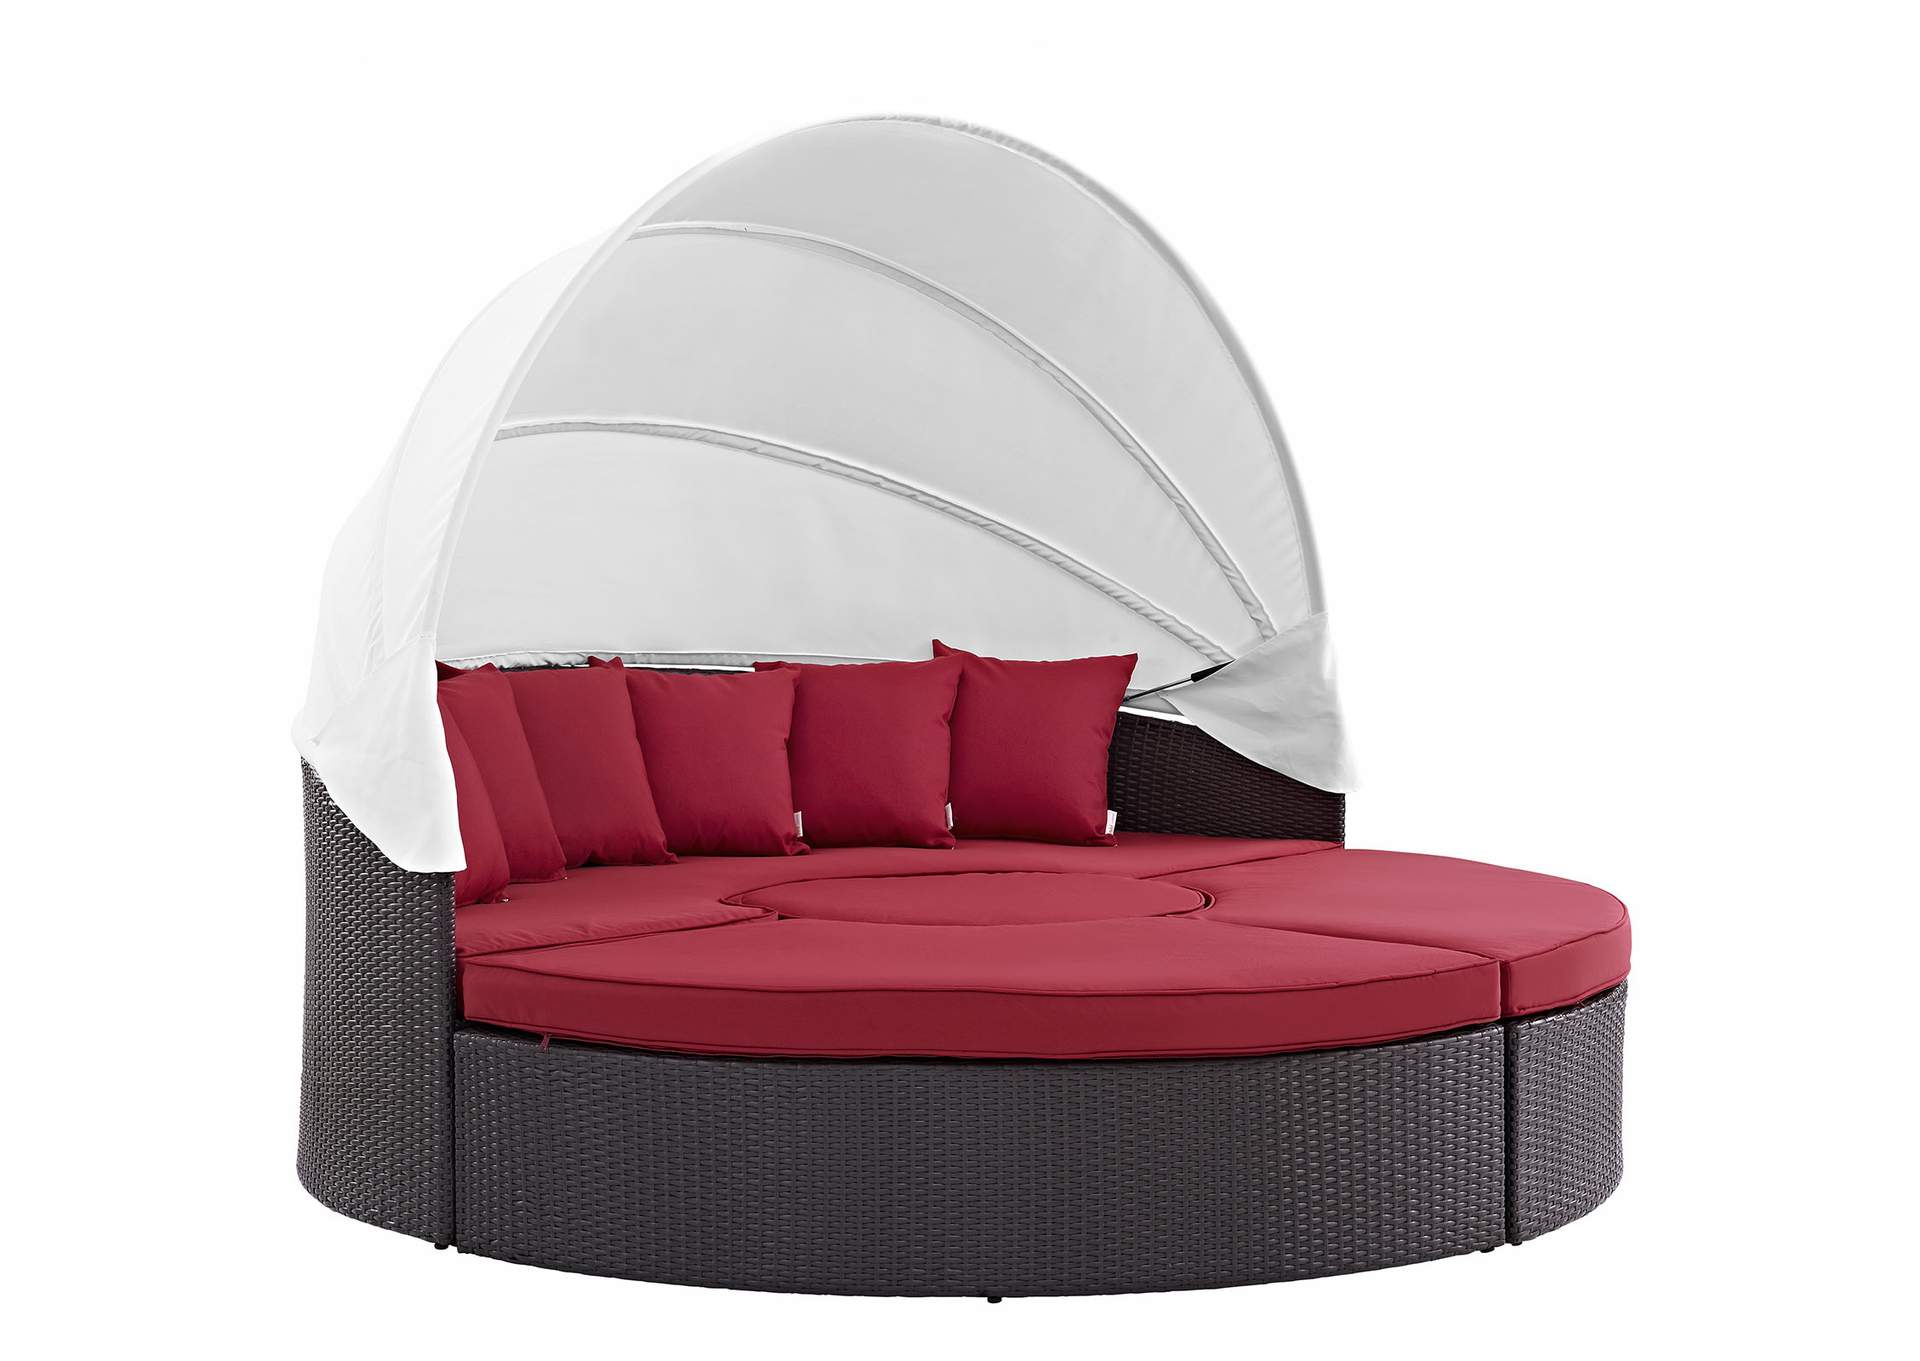 Espresso Red Convene Canopy Outdoor Patio Daybed,Modway